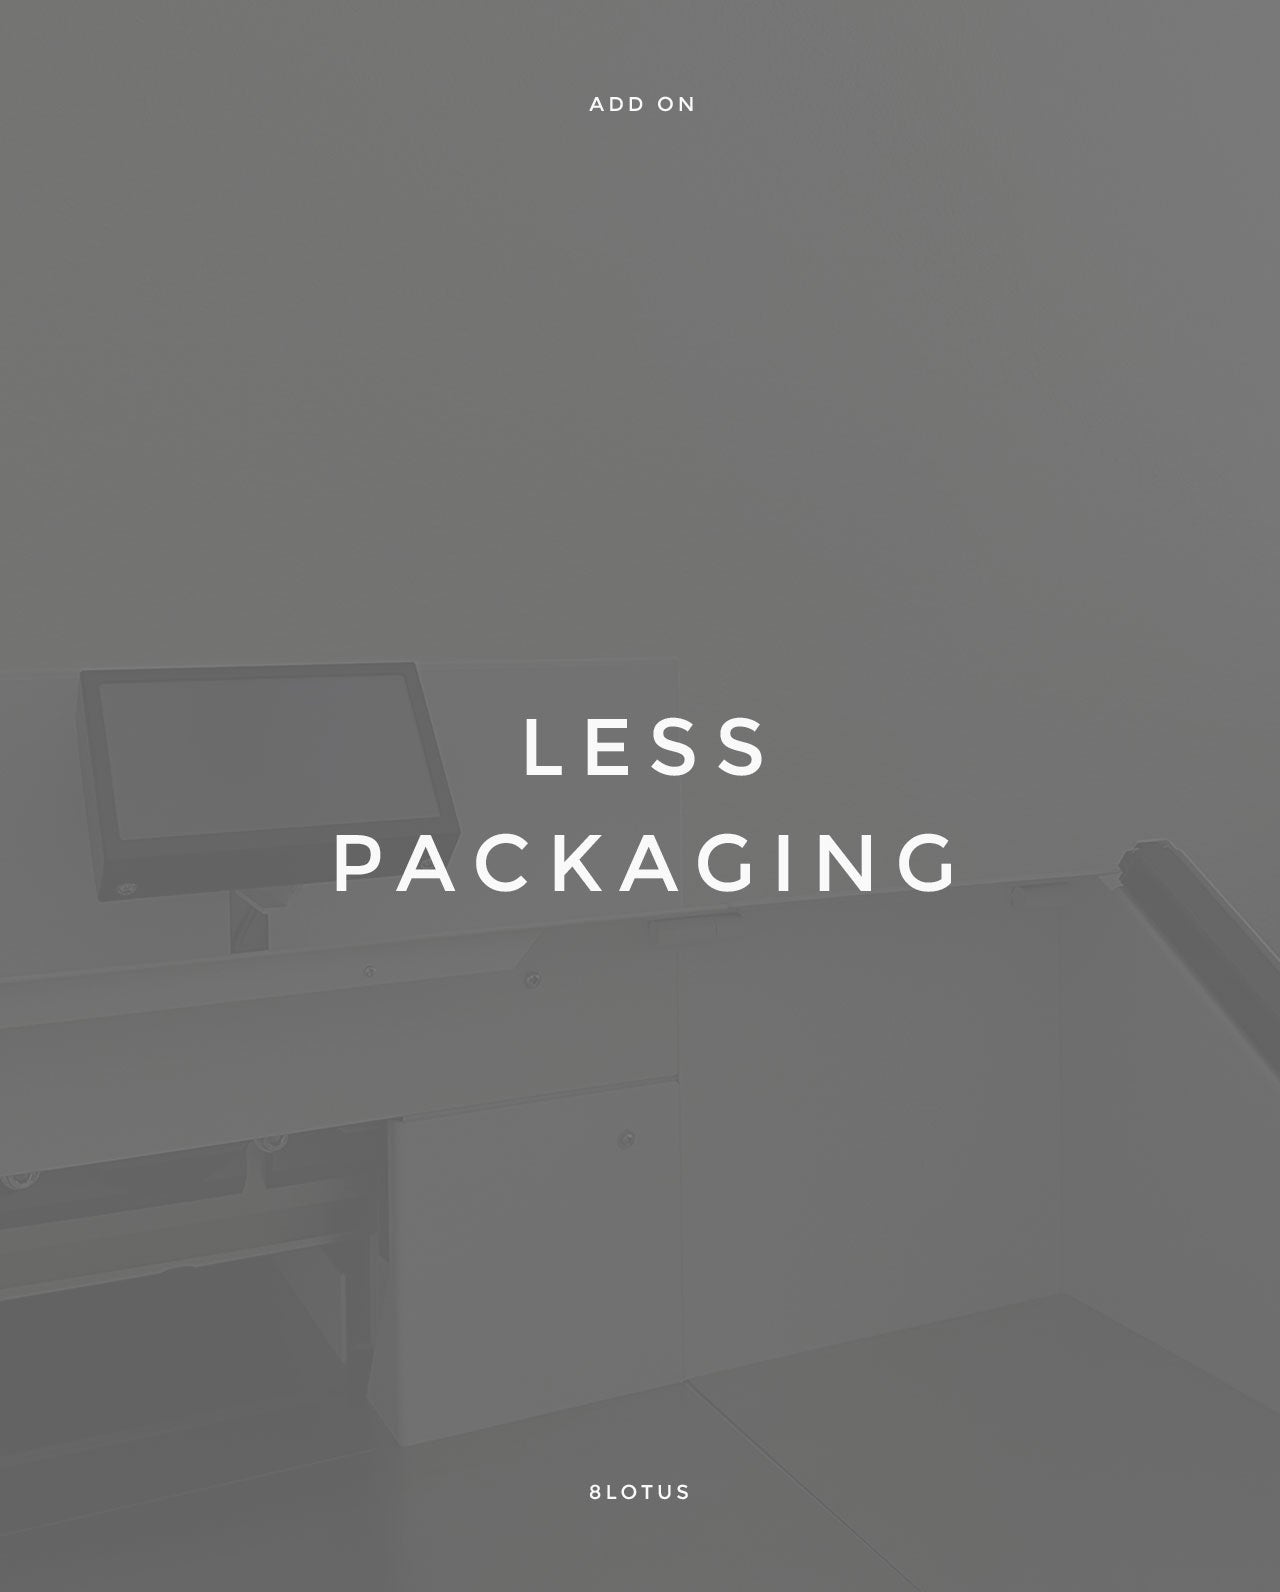 Less Packaging - Add On